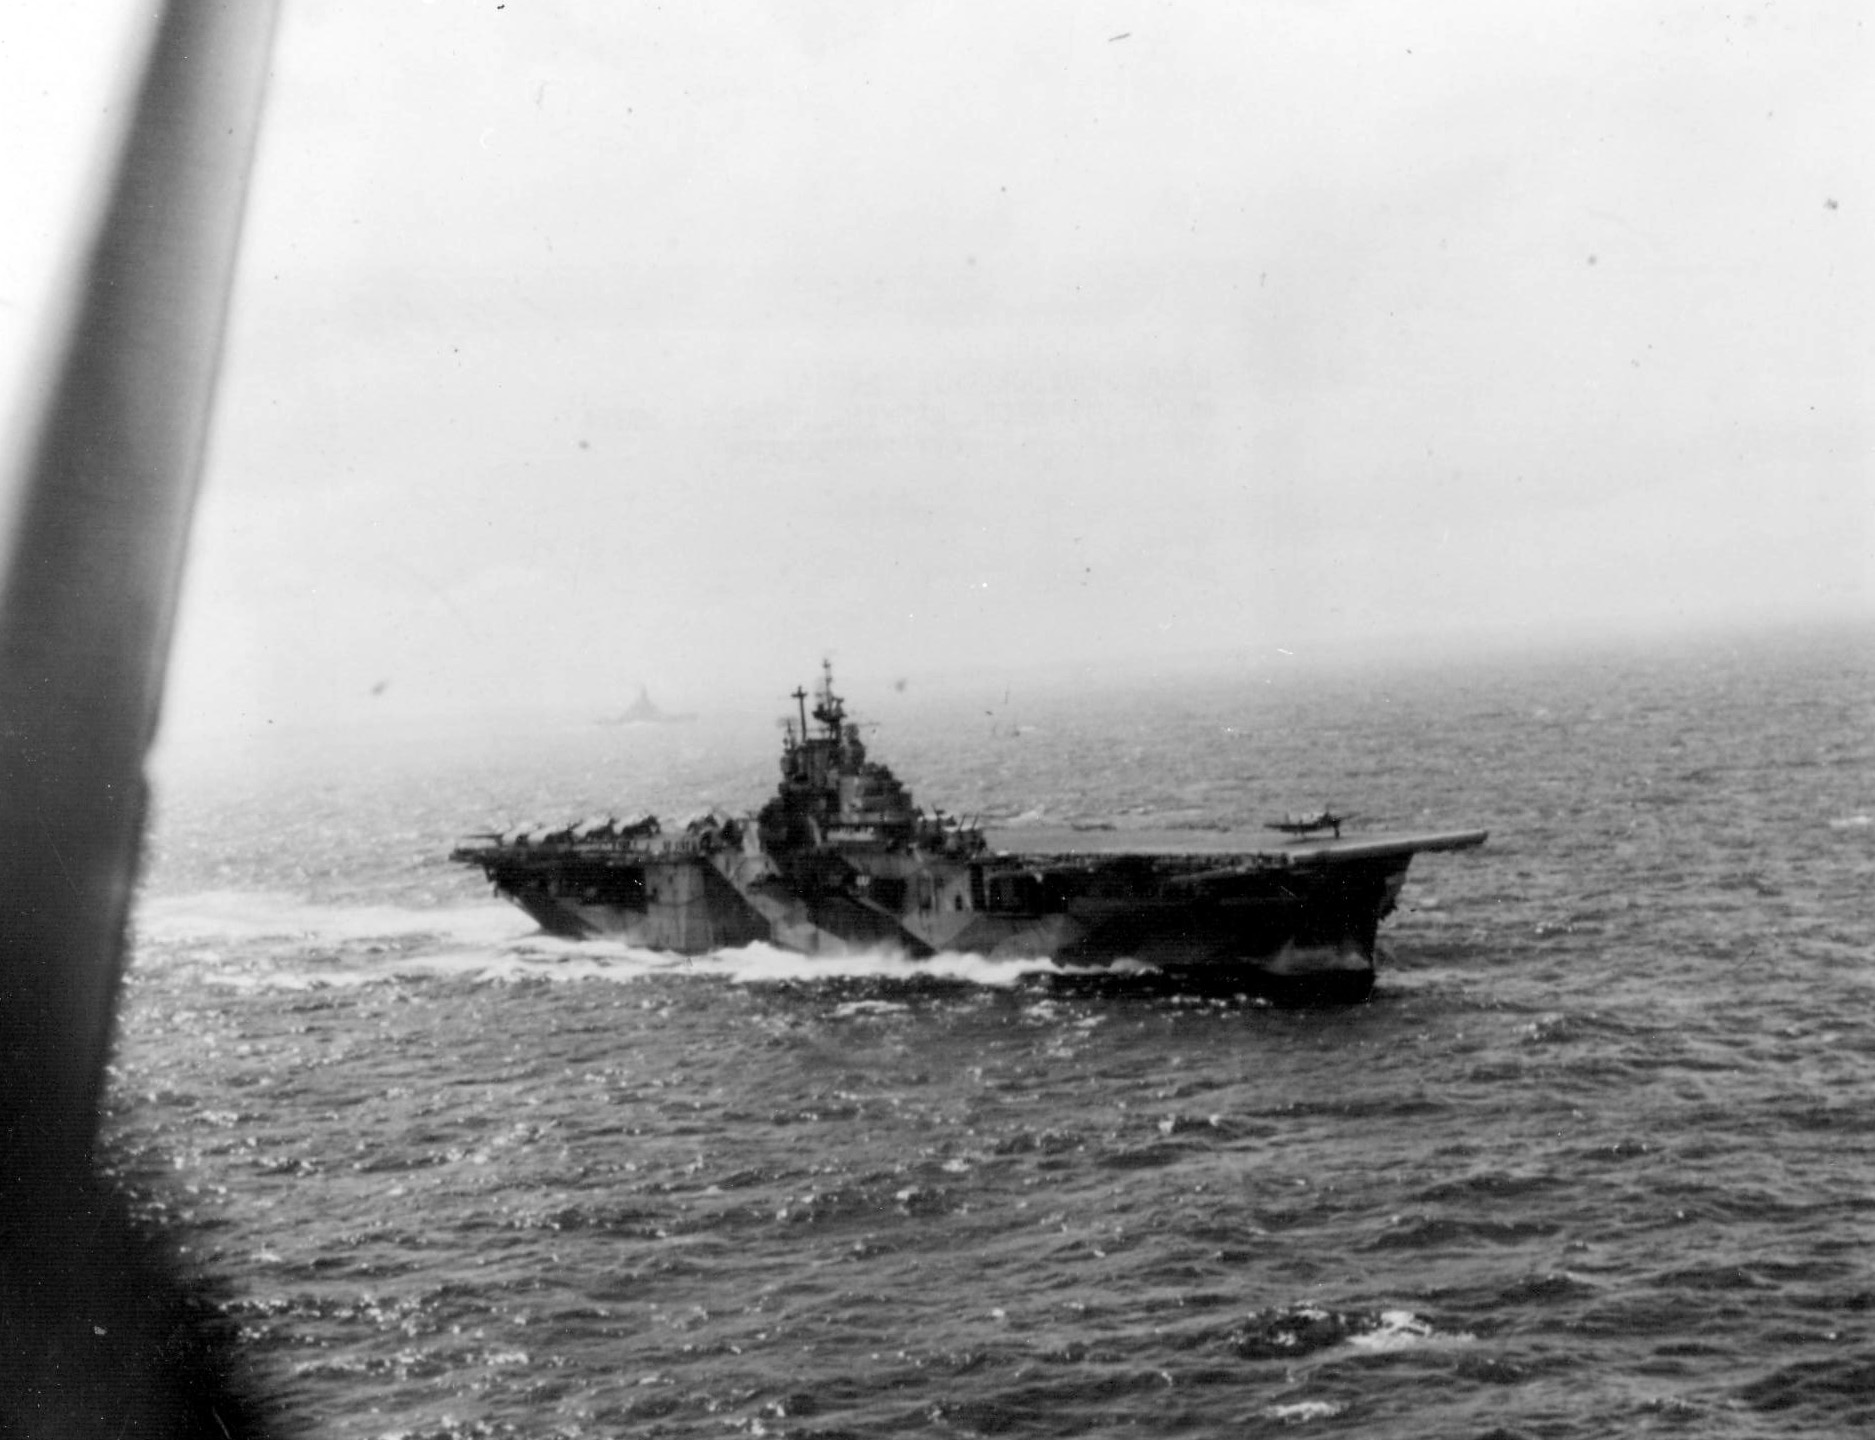 USS Intrepid launching a SB2C Helldiver during the Battle of Leyte Gulf, 24 Oct 1944.